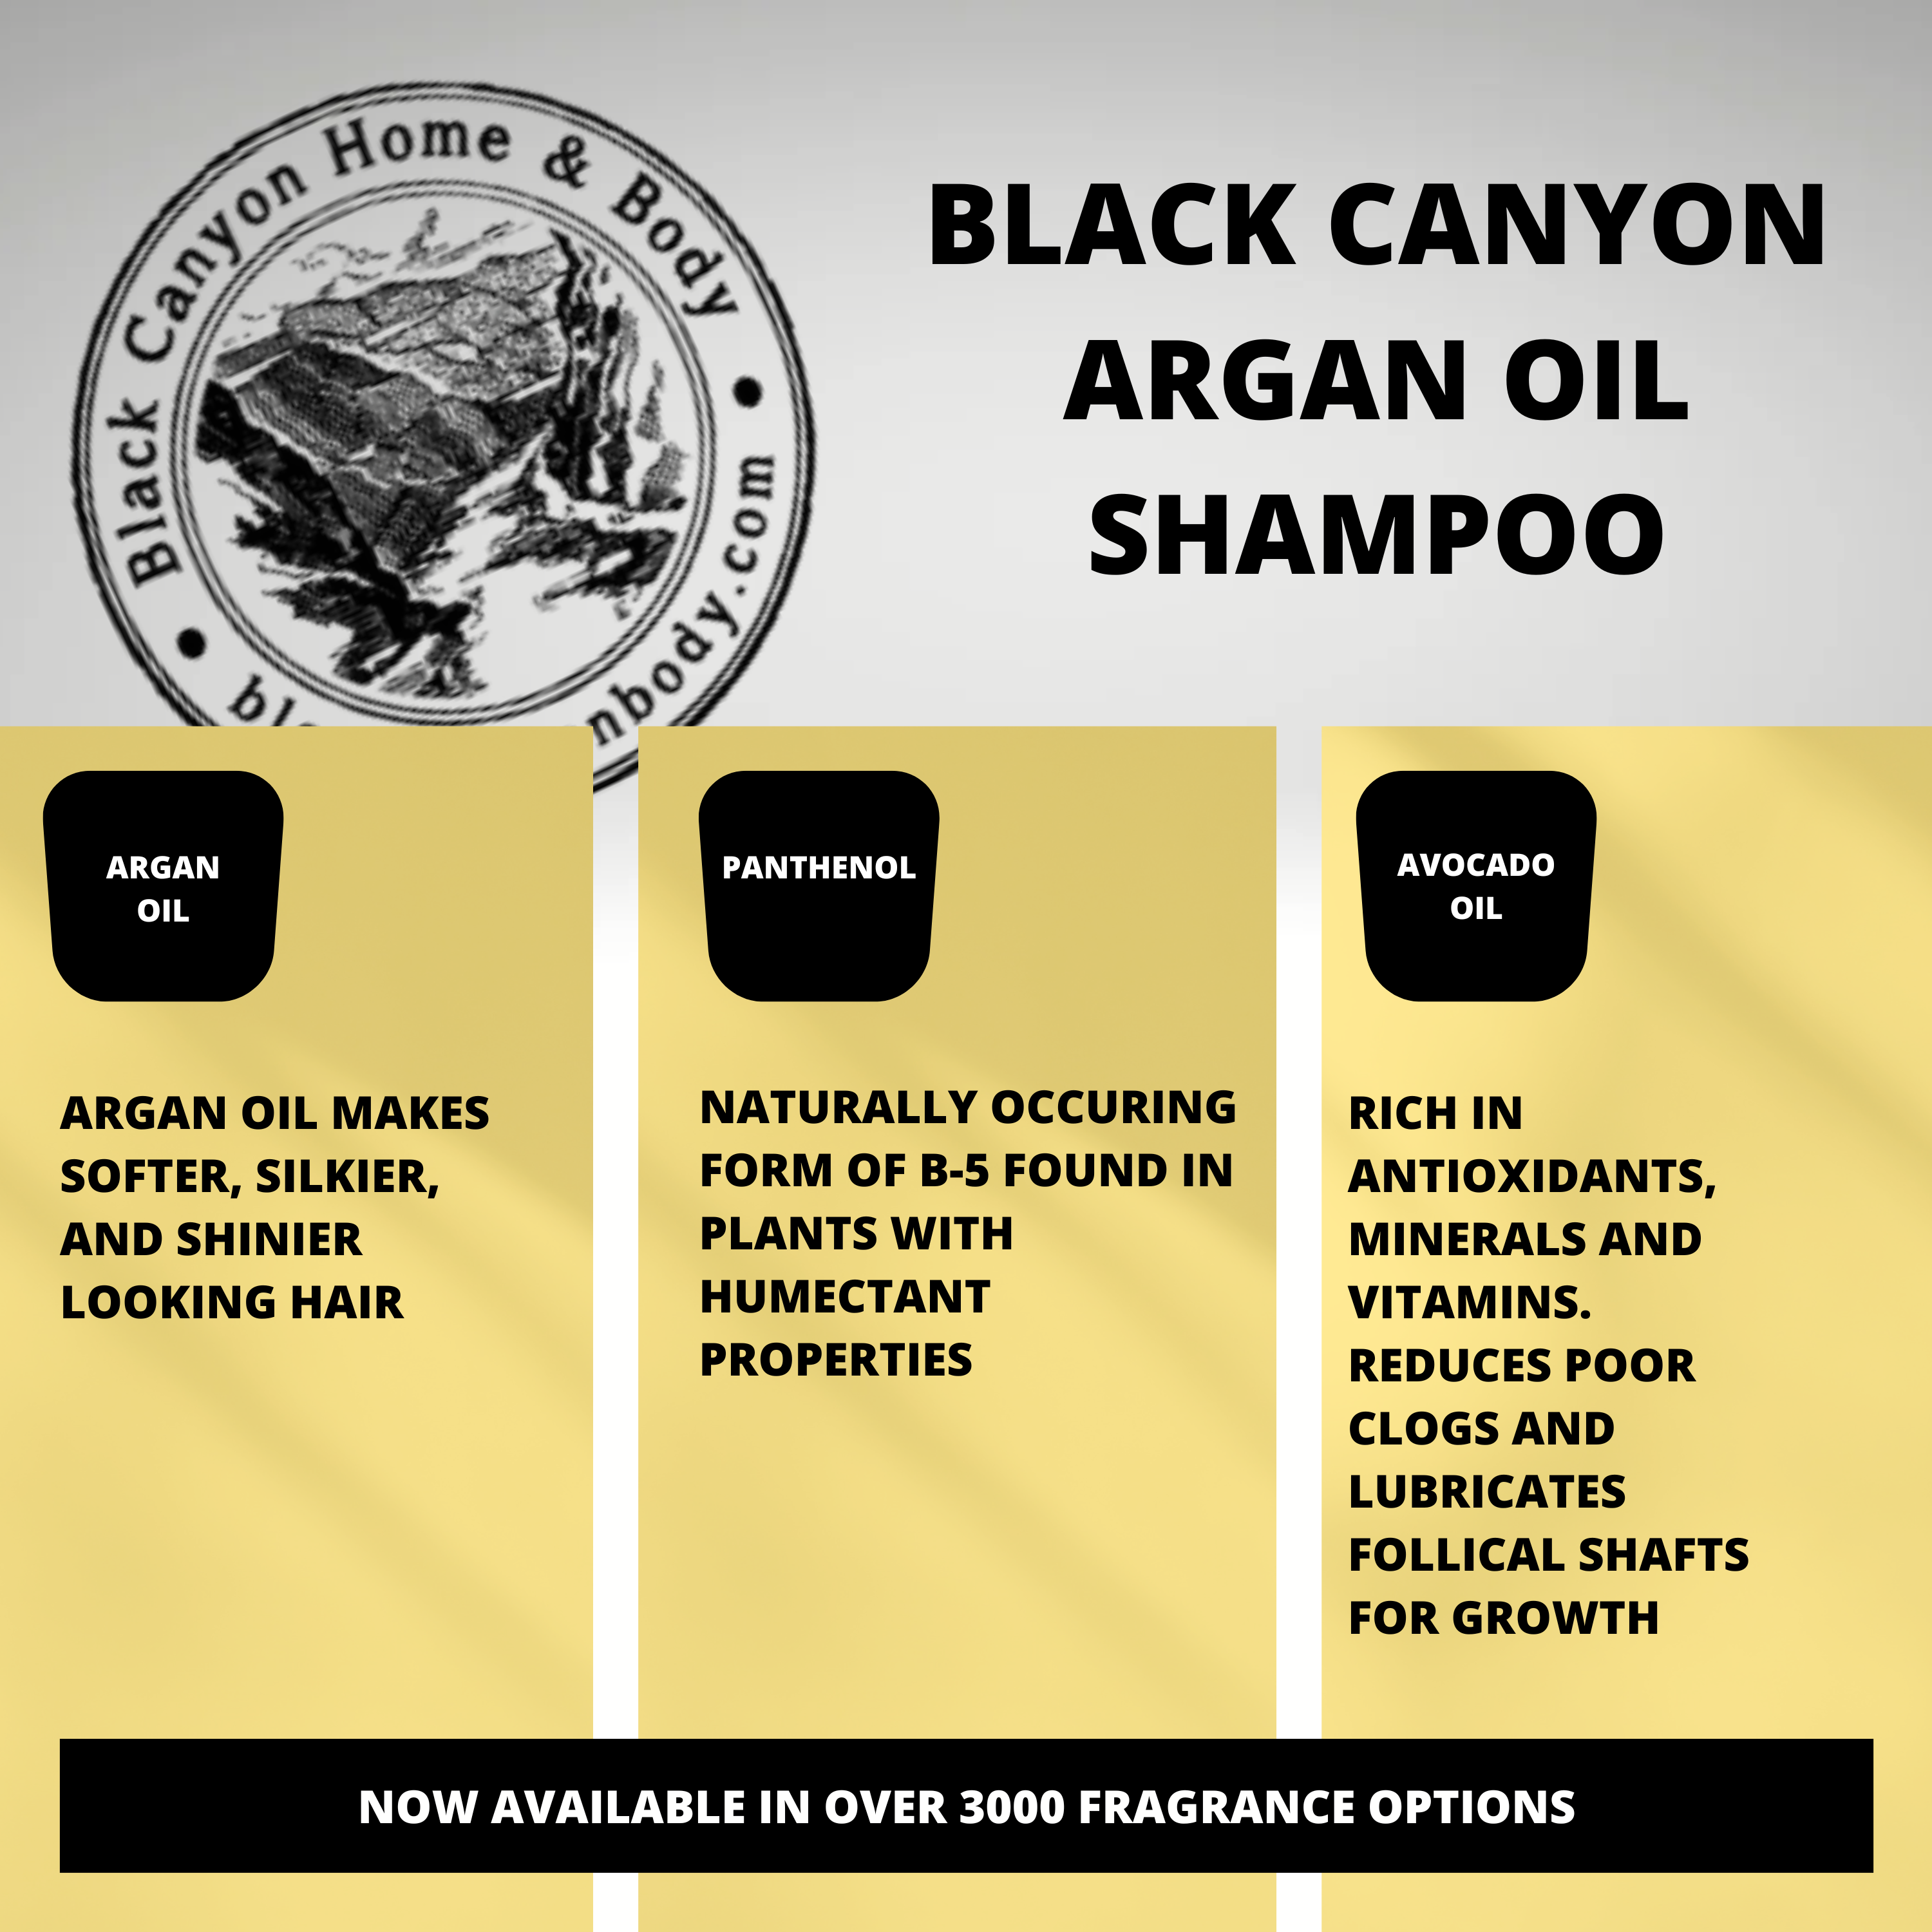 Black Canyon Poinsettia Scented Shampoo with Argan Oil